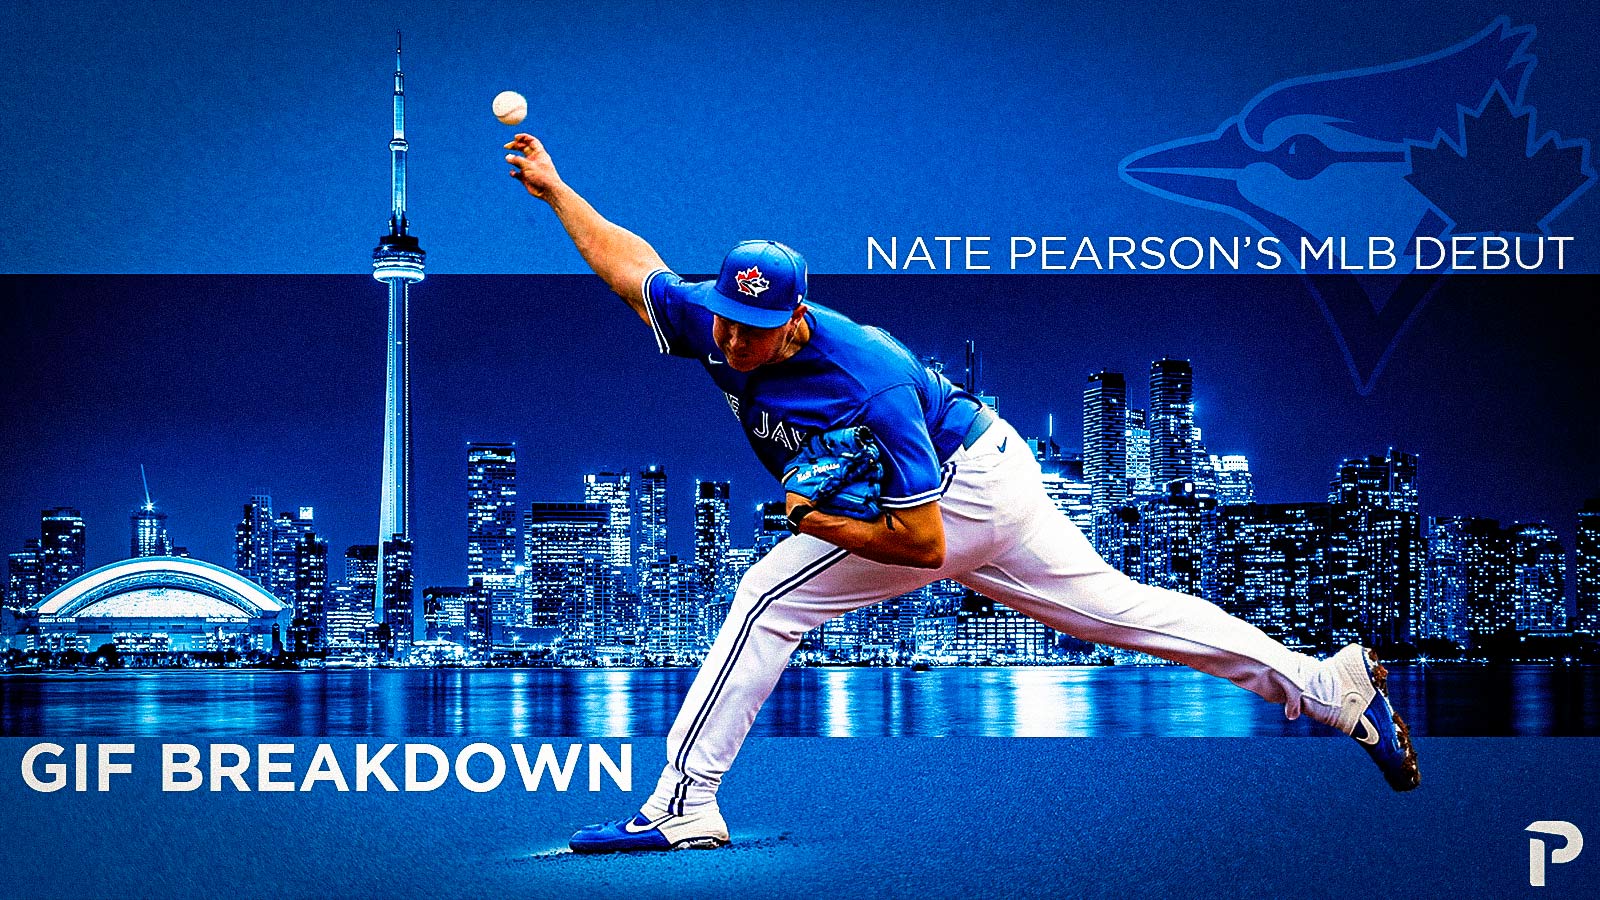 BREAKING NEWS Blue Jays Call Up Nate Pearson Potential Elite